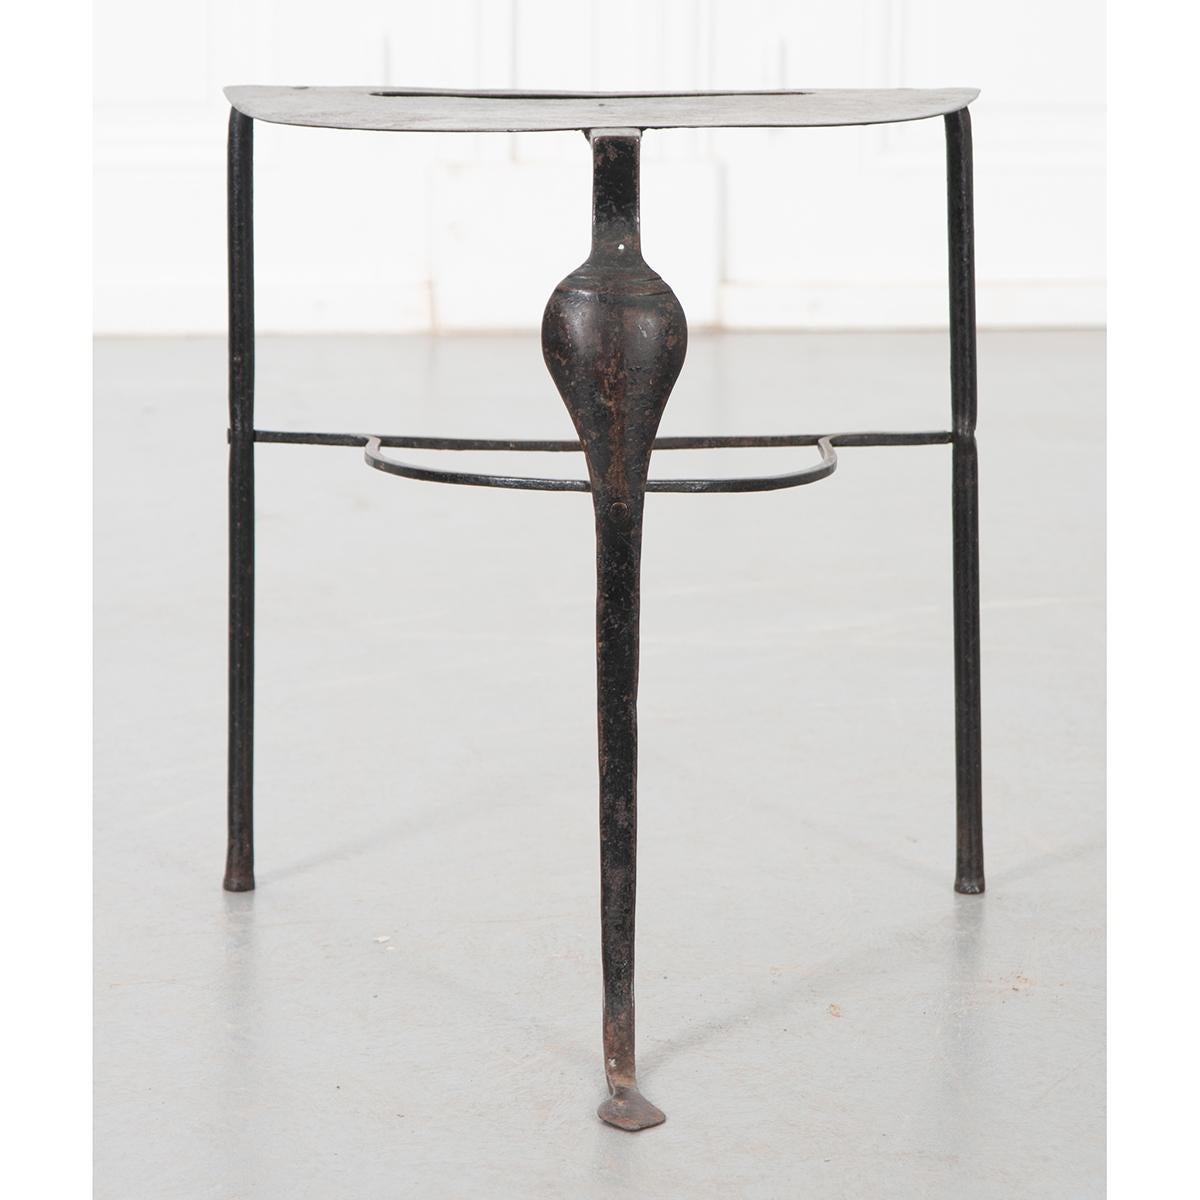 A small but lovely example of the blacksmith’s art. The hand-forged 19th century iron trivet features a flat surface to place hot pots that have come off the open fire or stove after cooking. It has two straight legs in the back and one cabriole leg